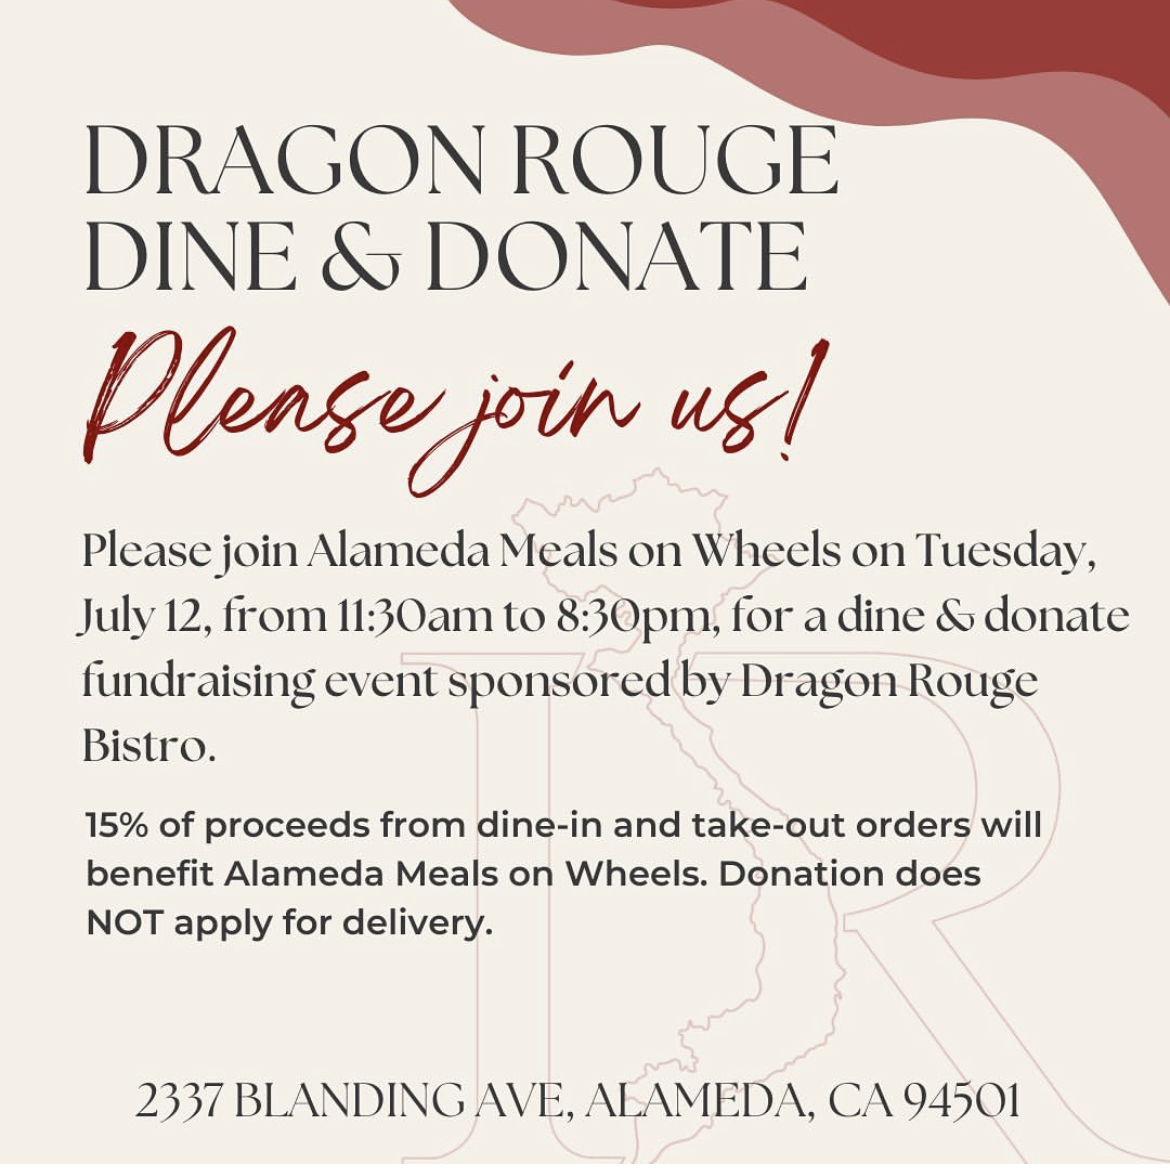 Dine & Donate for Meals on Wheels @ Dragon Rouge